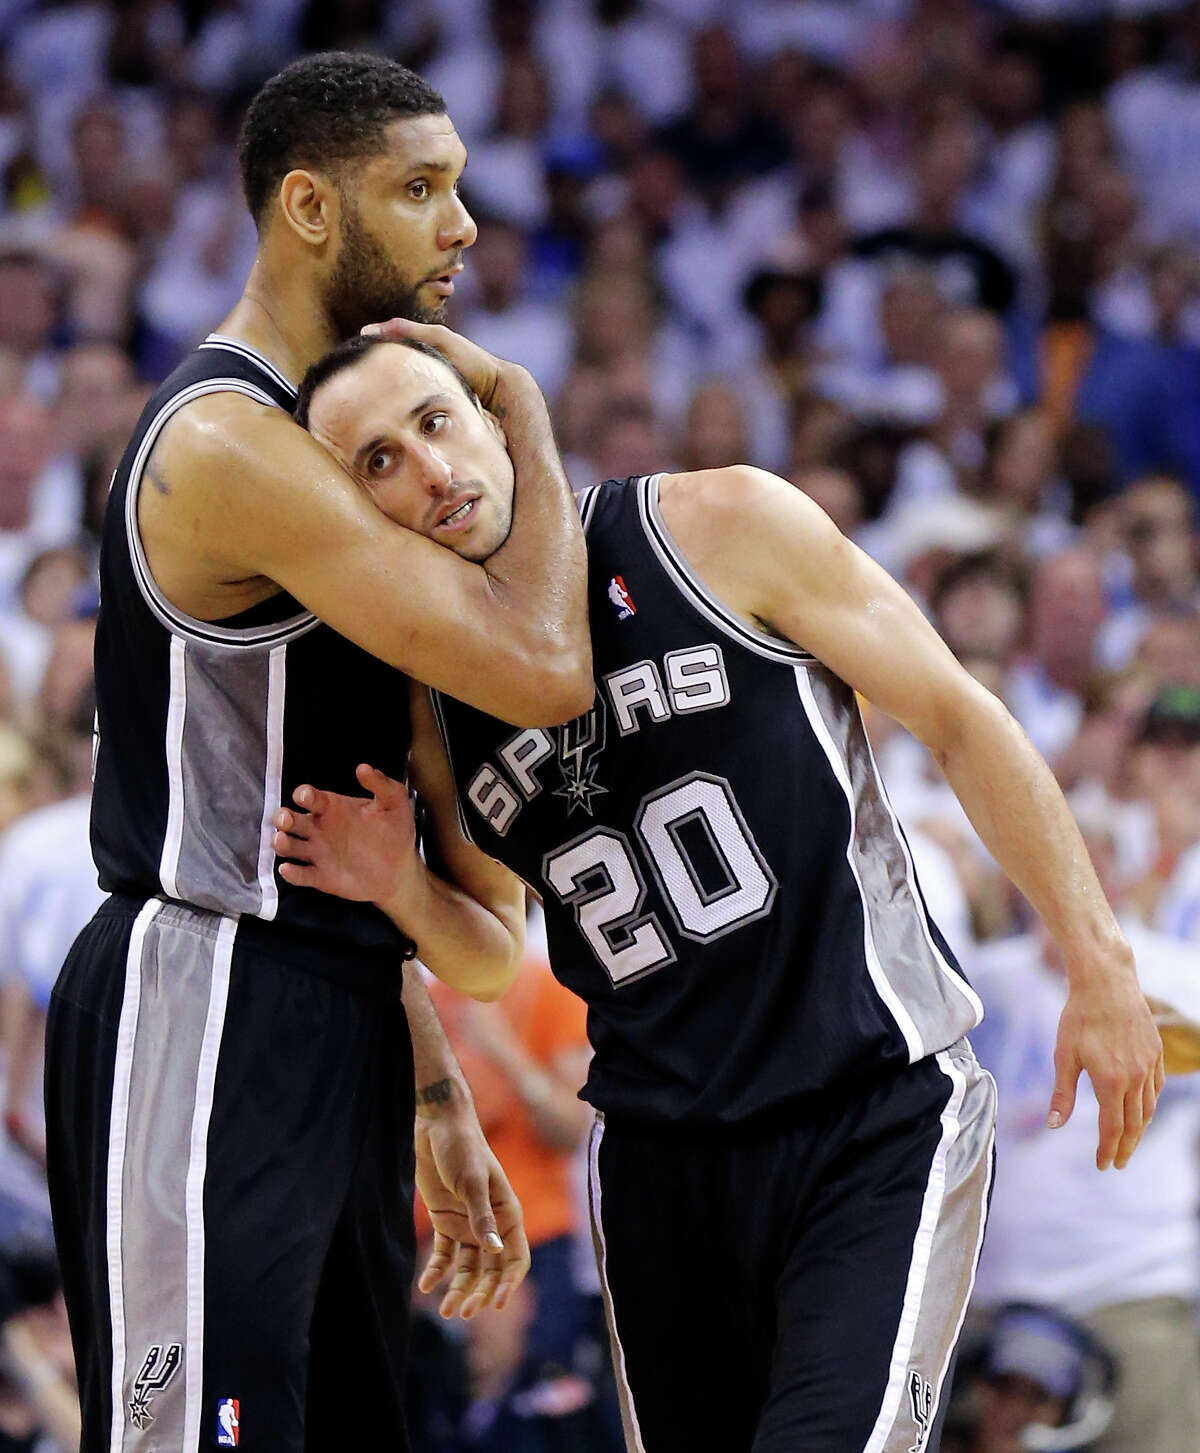 1. Hug it out with a friend, Timmy and Manu style